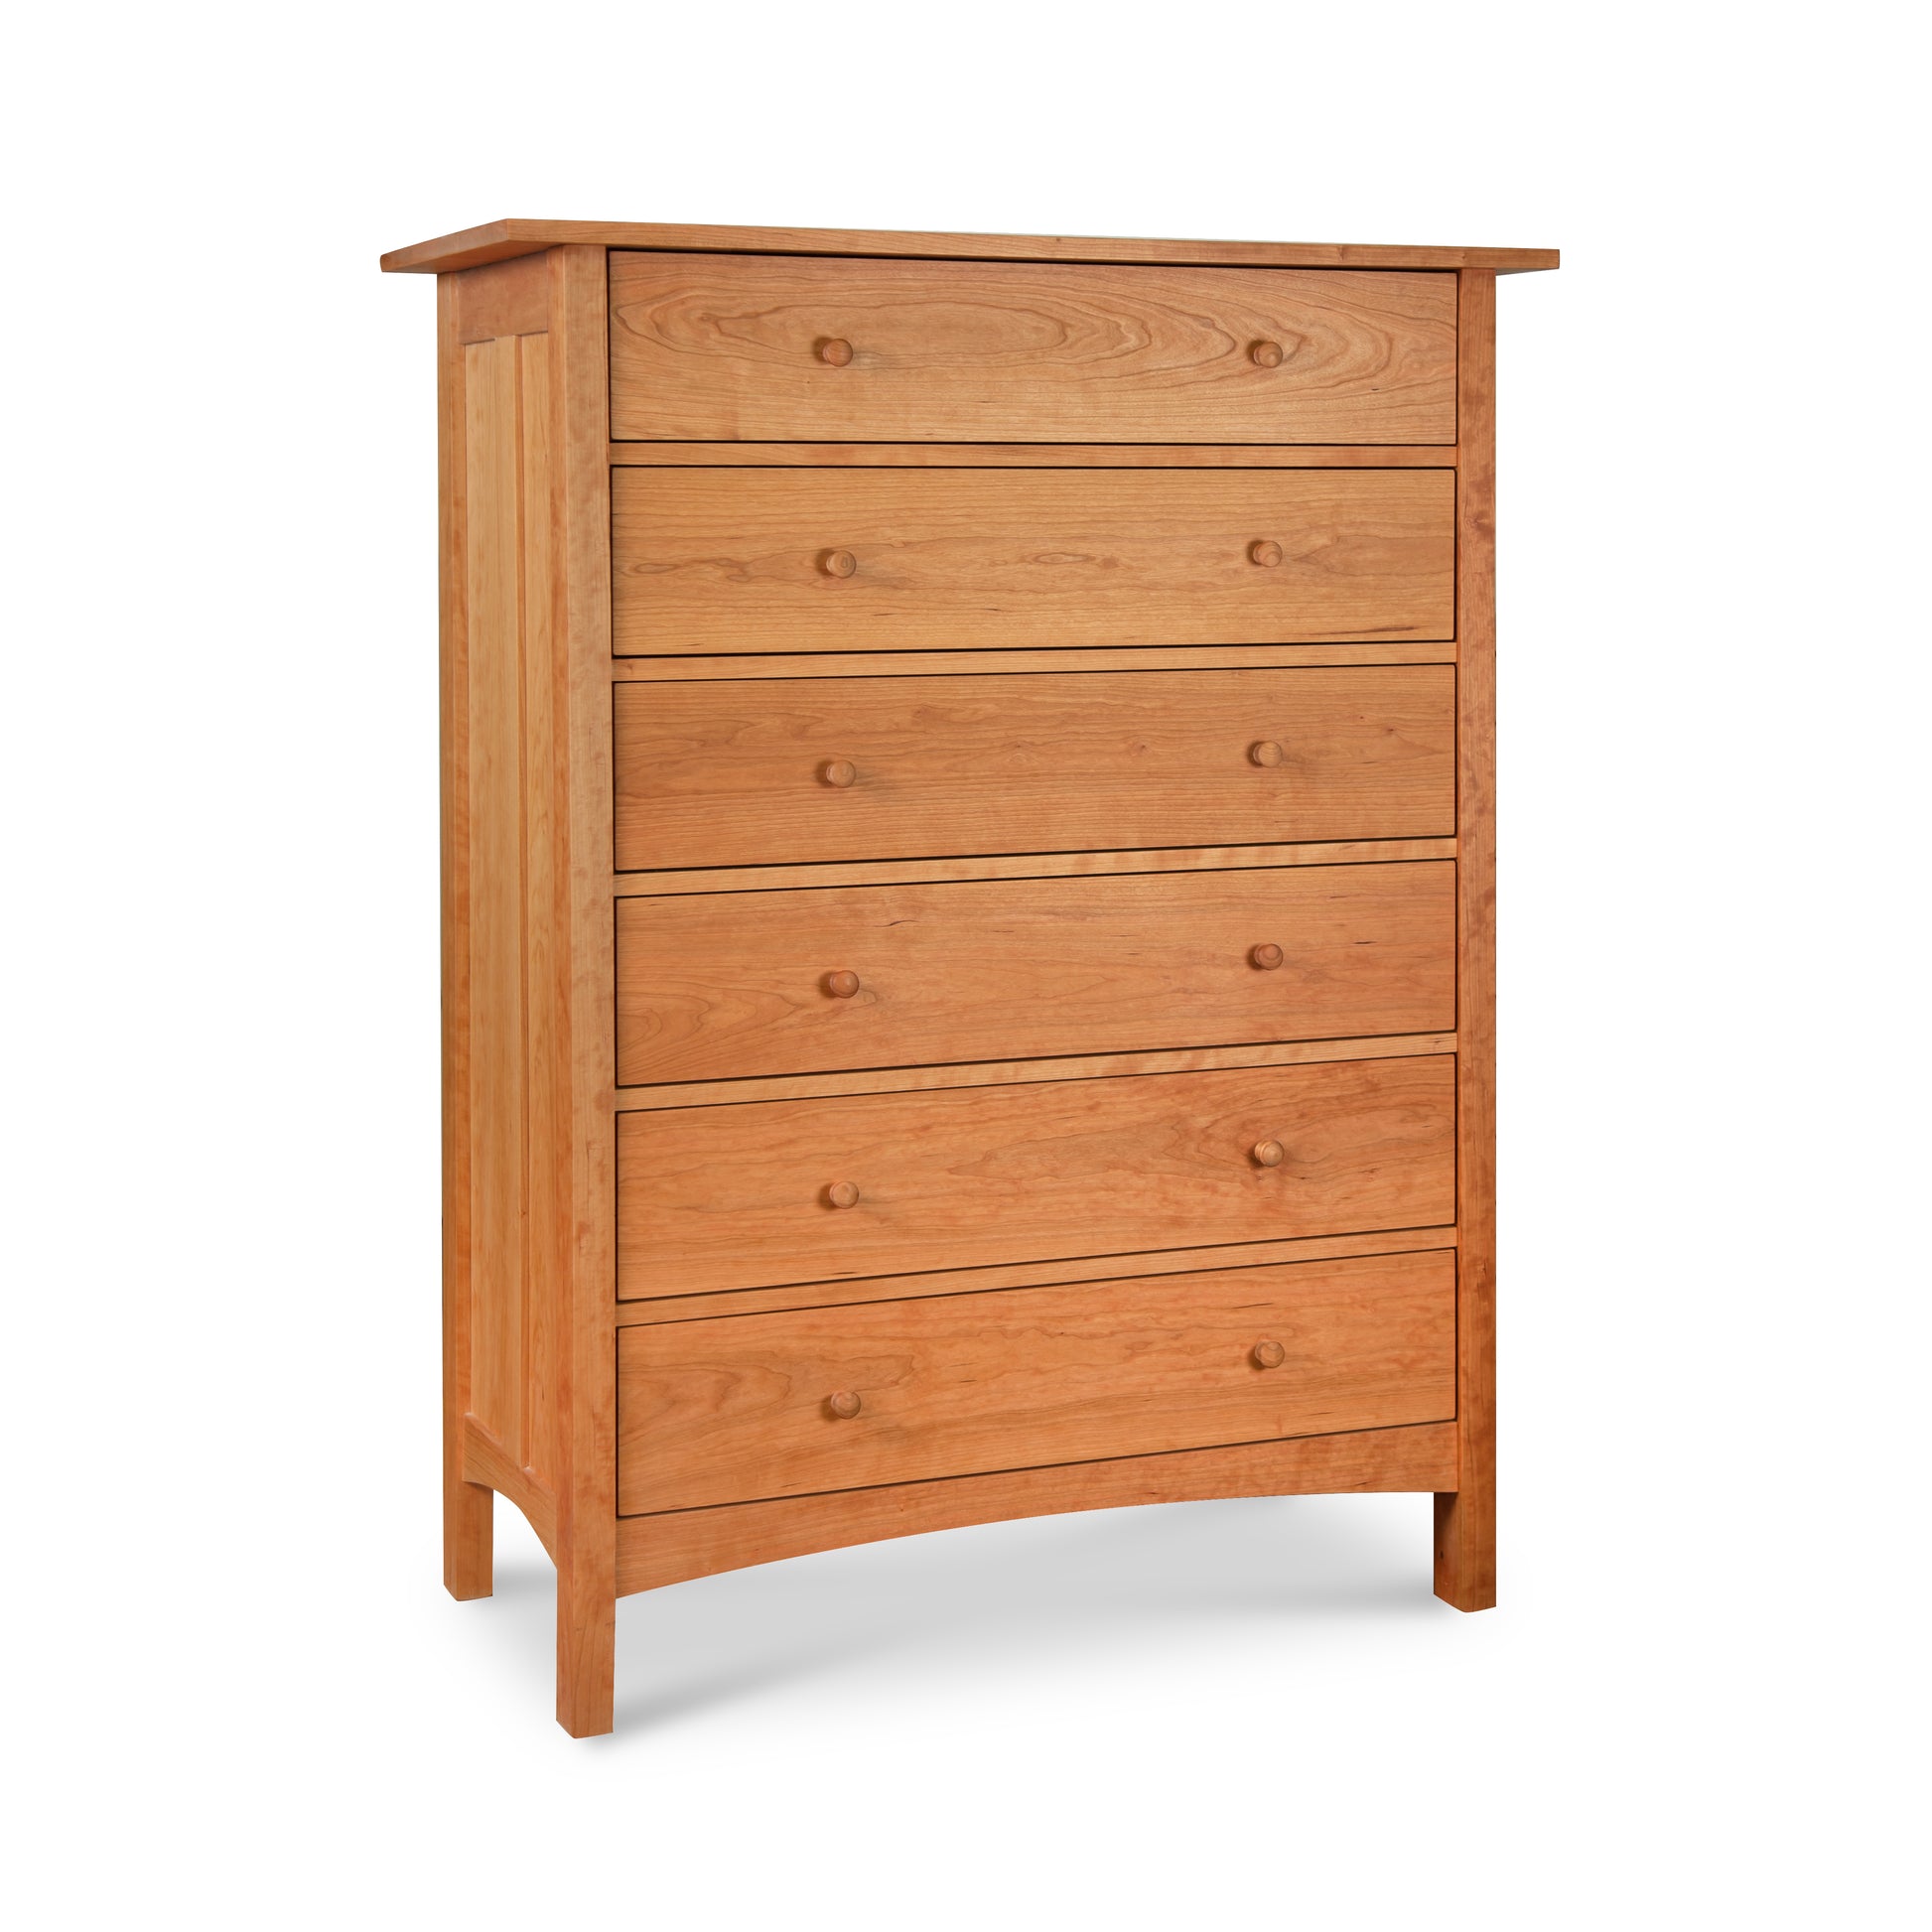 A Vermont Furniture Designs Burlington Shaker 6-drawer chest with an eco-friendly oil finish on a white background.